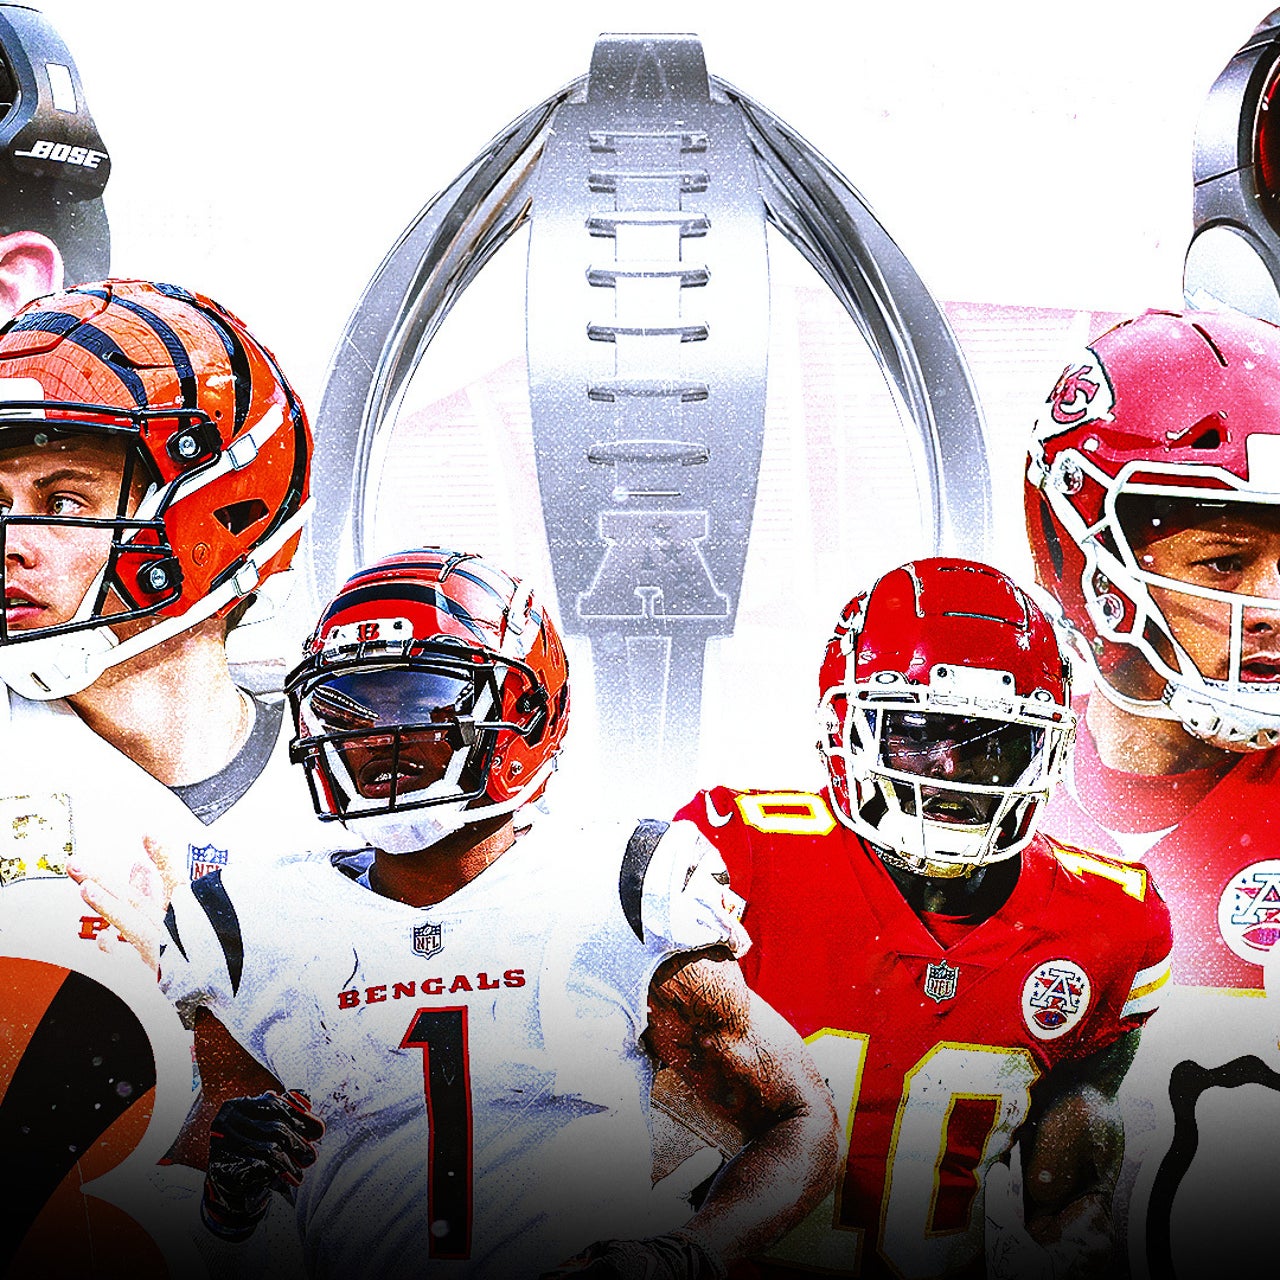 AFC Championship: Super Bowl visit on the line for Chiefs and Bengals